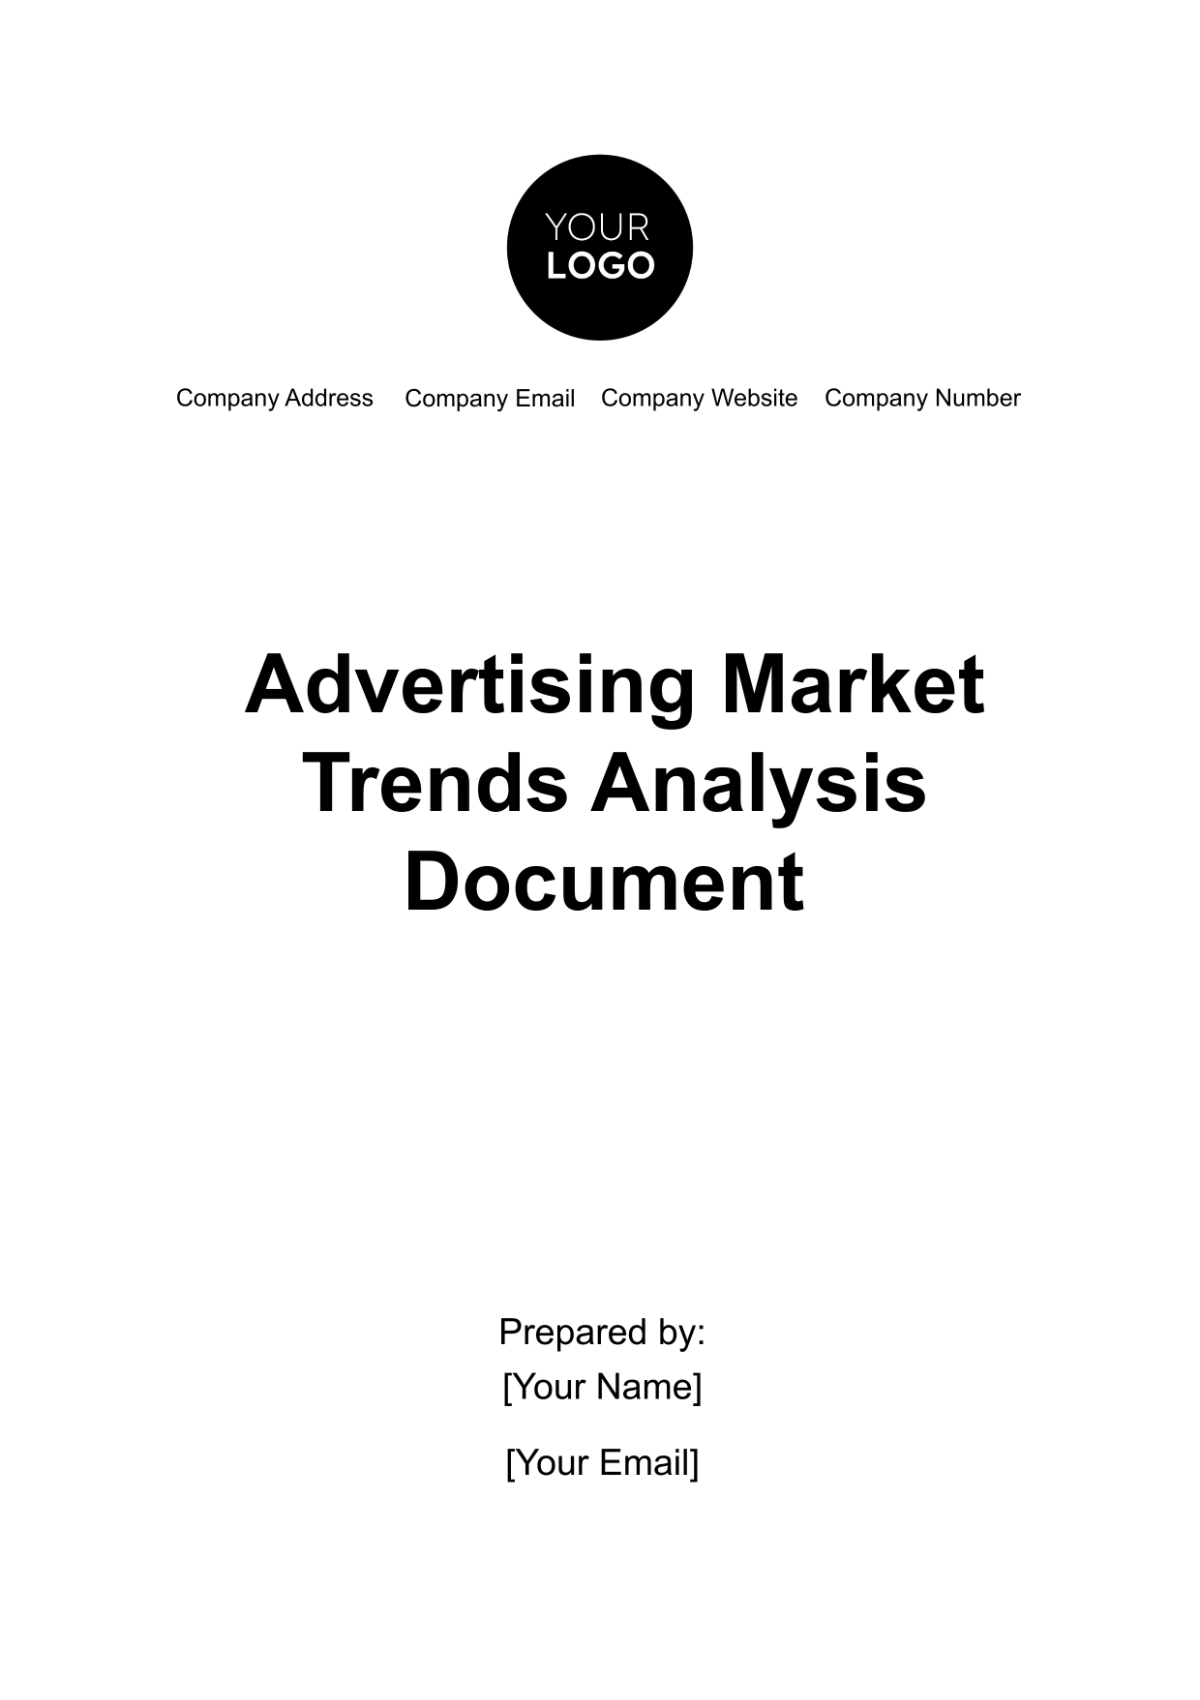 Advertising Market Trends Analysis Document Template